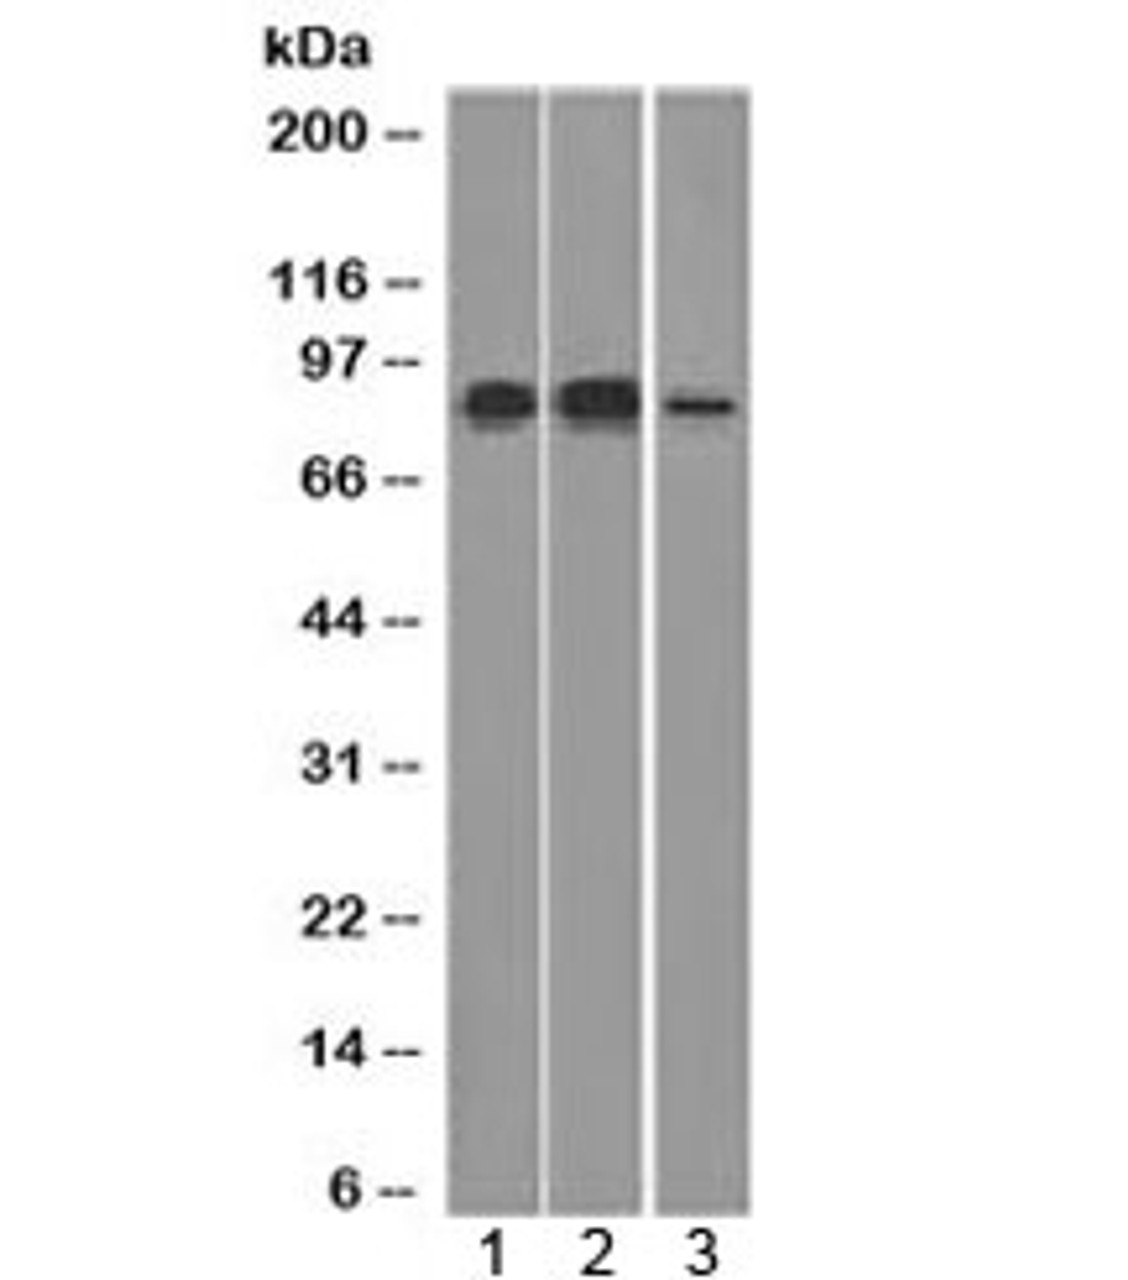 Western blot testing of human 1) HeLa, 2) Raji and 3) HepG2 cell lysate with MCM7 antibody (clone MCM7/1466) . Expected molecular weight: 80-90 kDa.